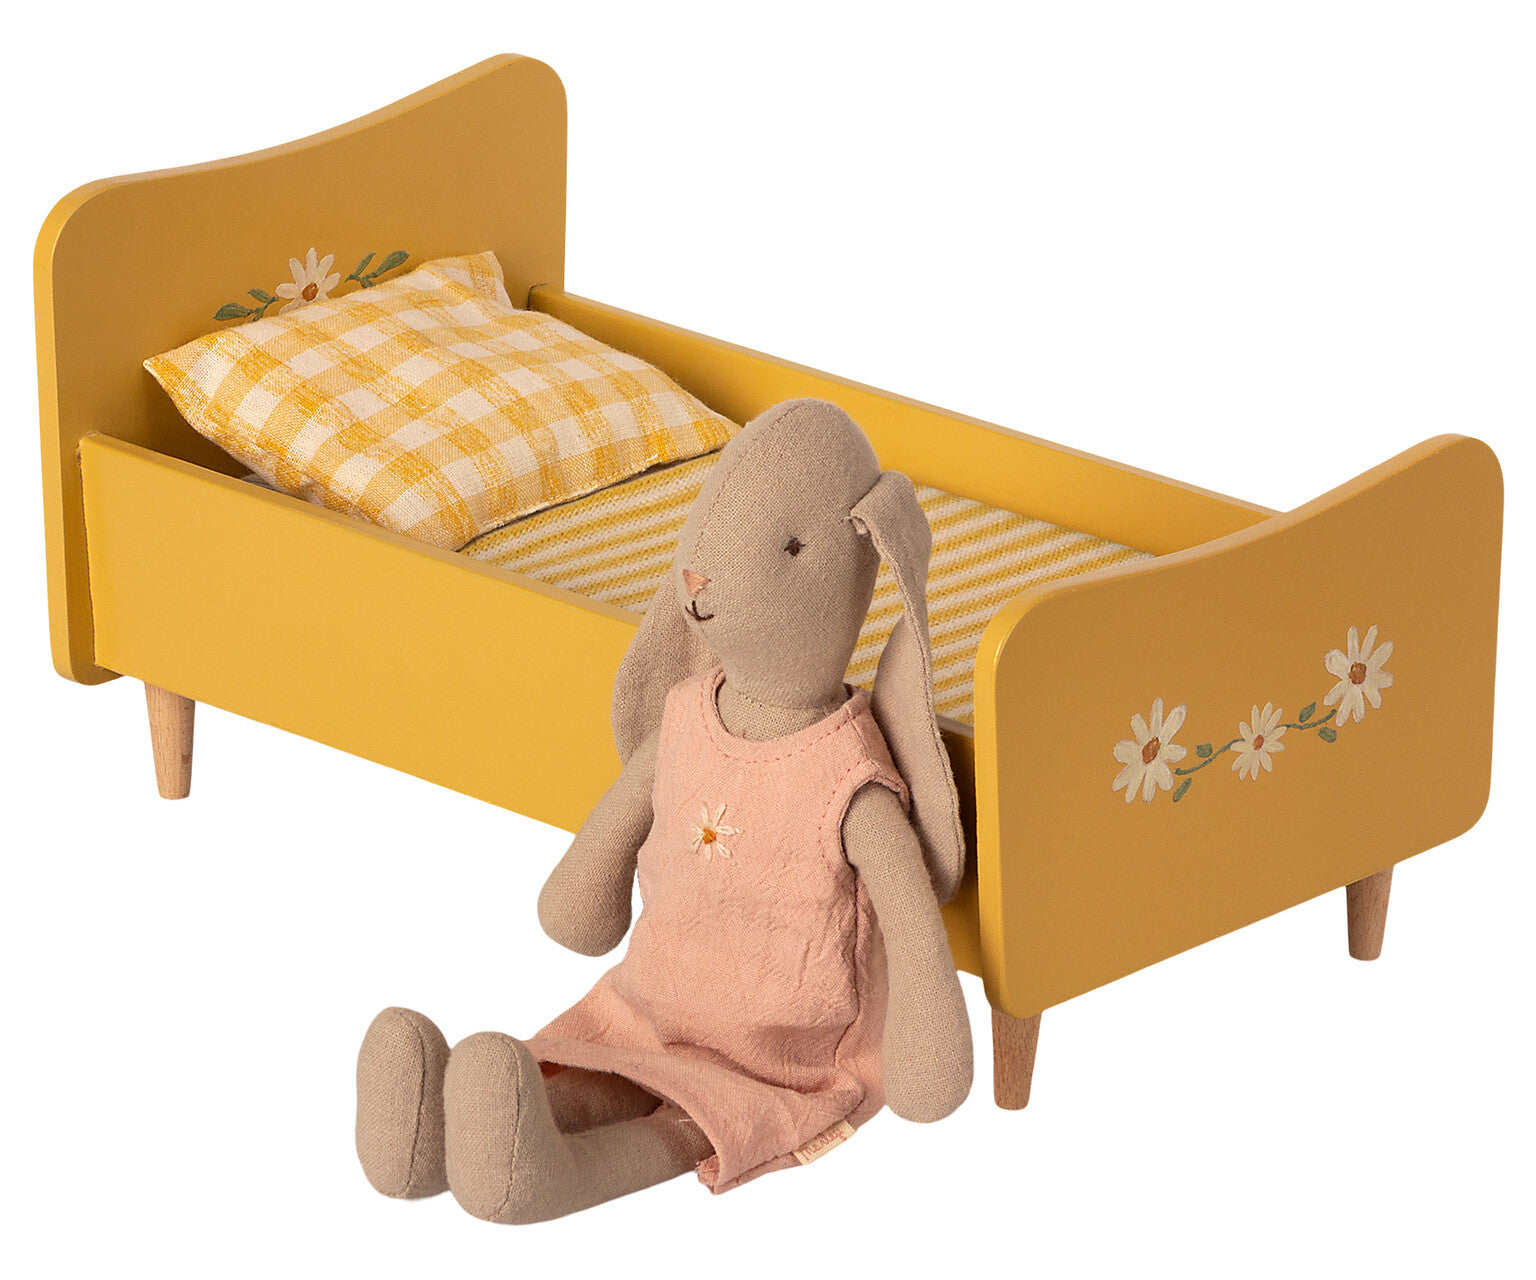 Mini Wooden Bed - Yellow